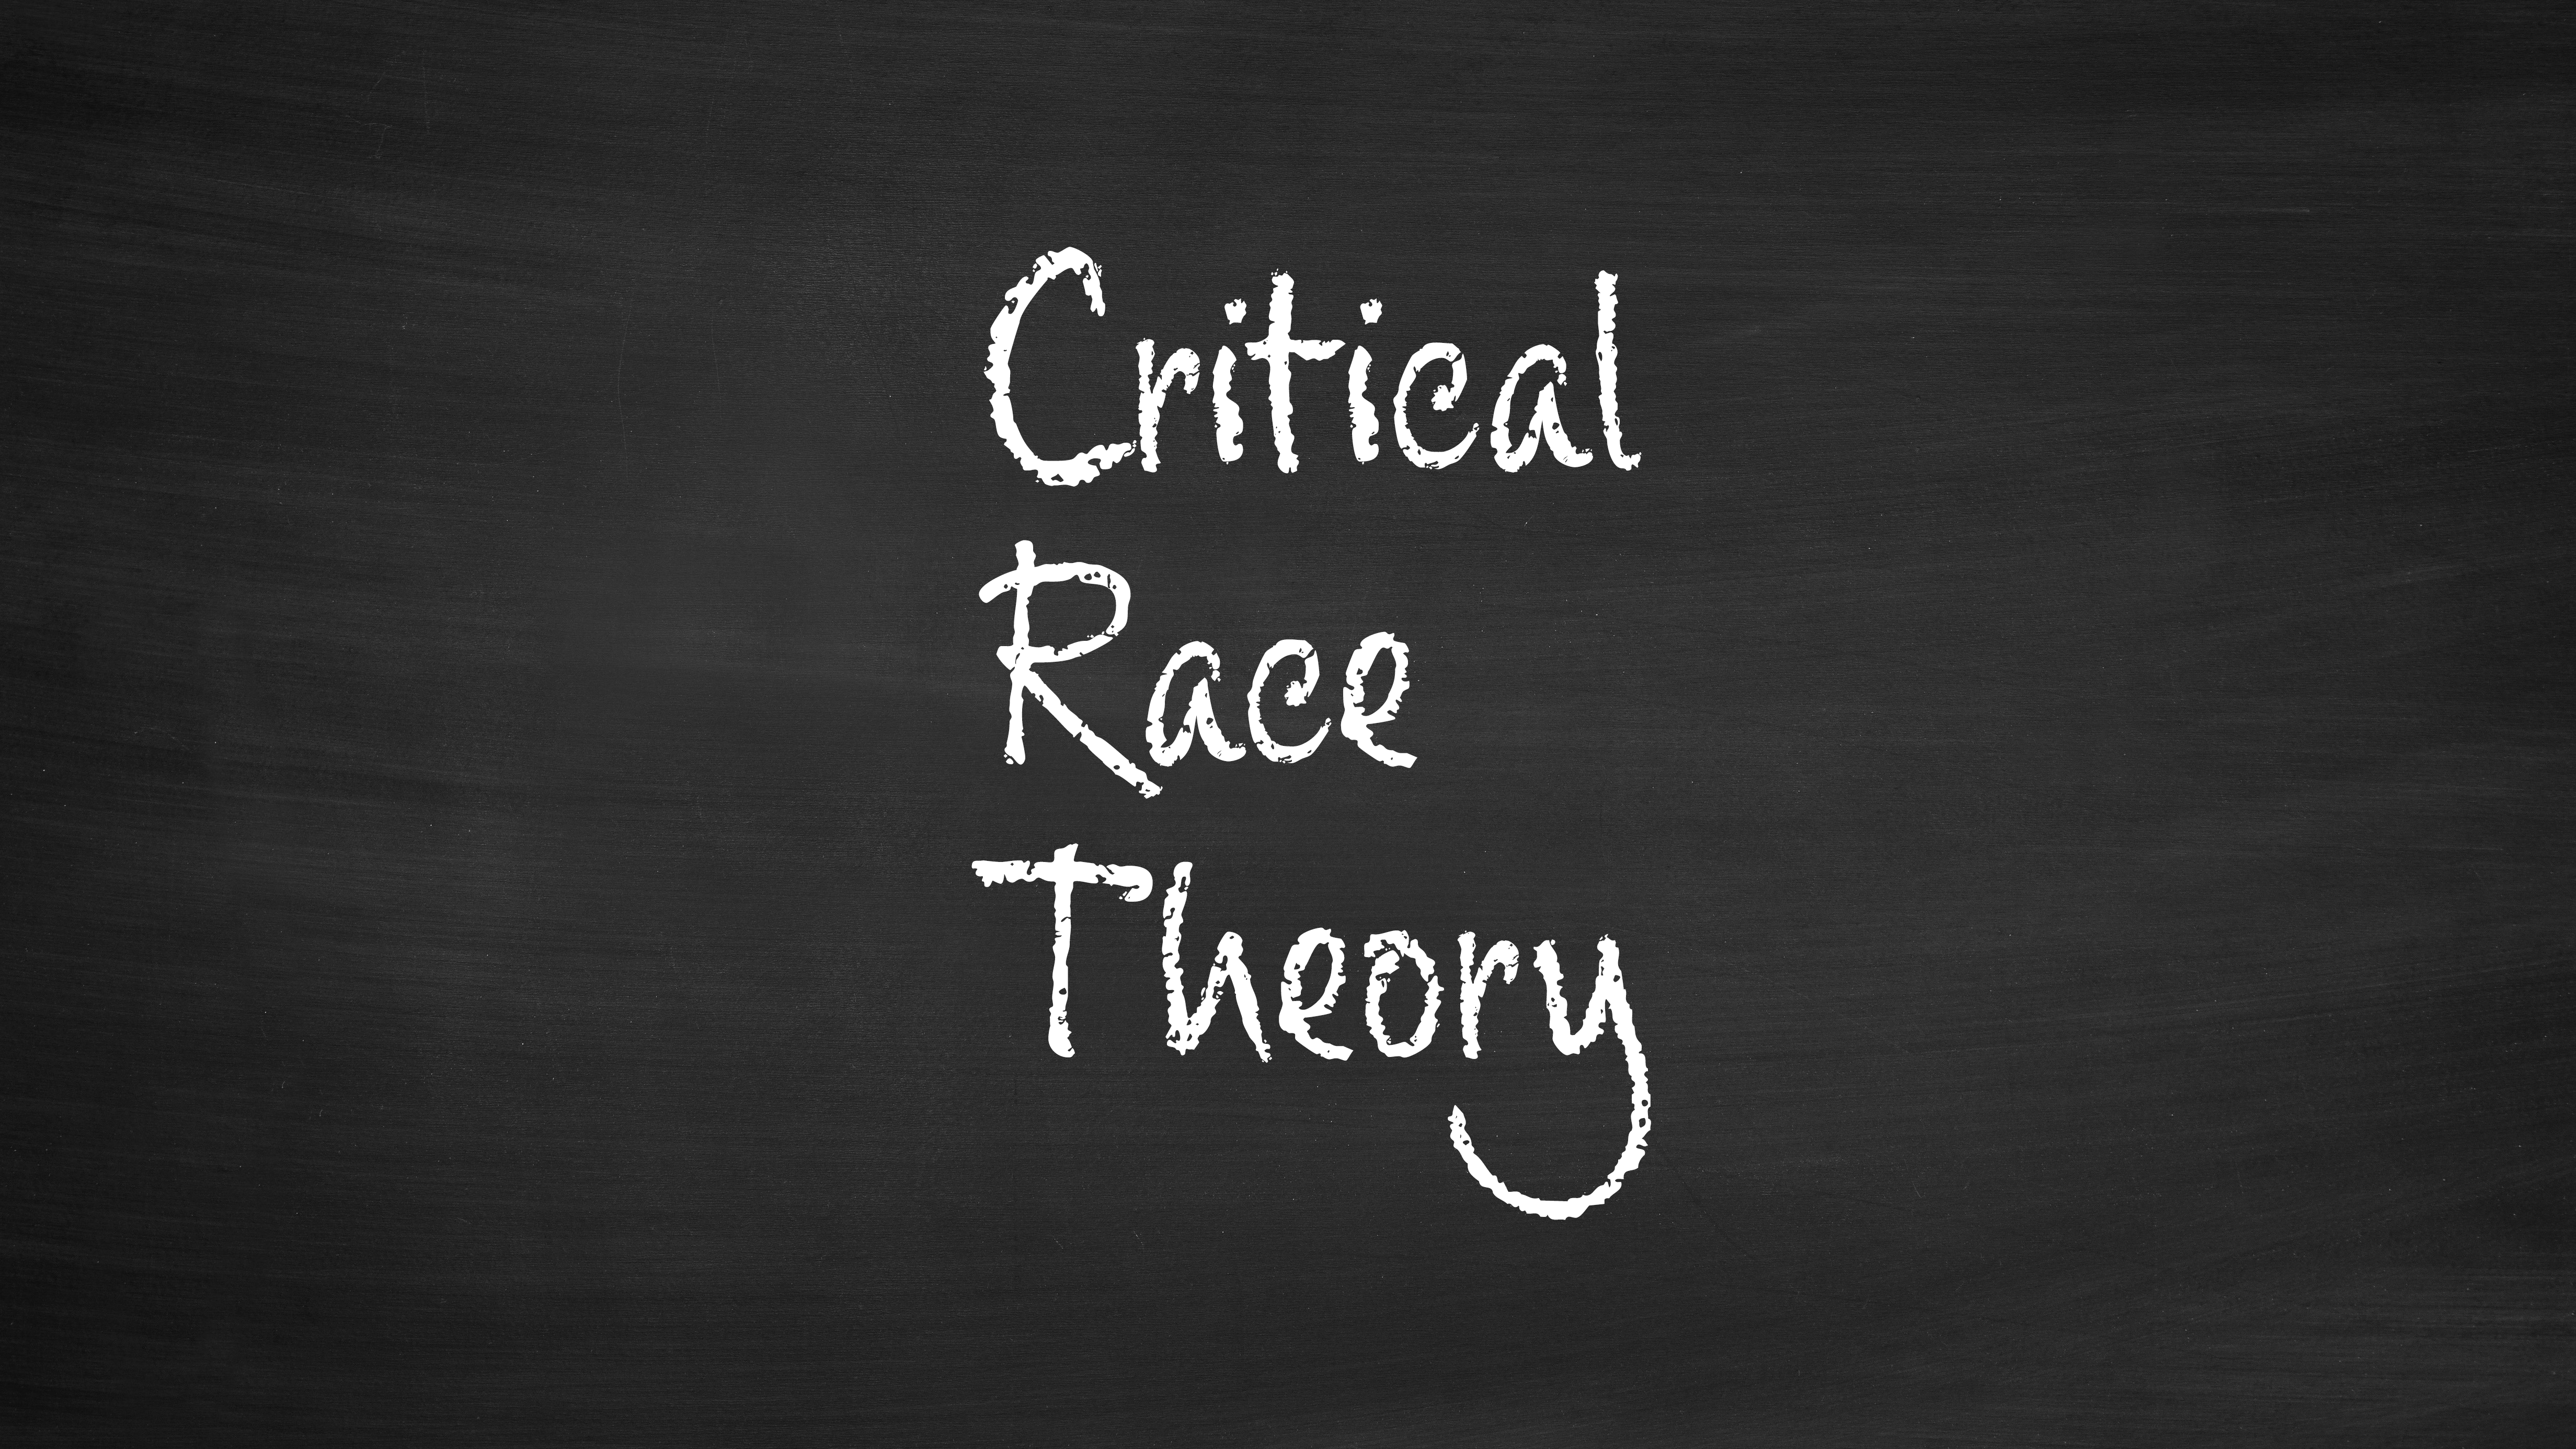 Yes, Virginia, There Is Critical Race Theory in Our Schools